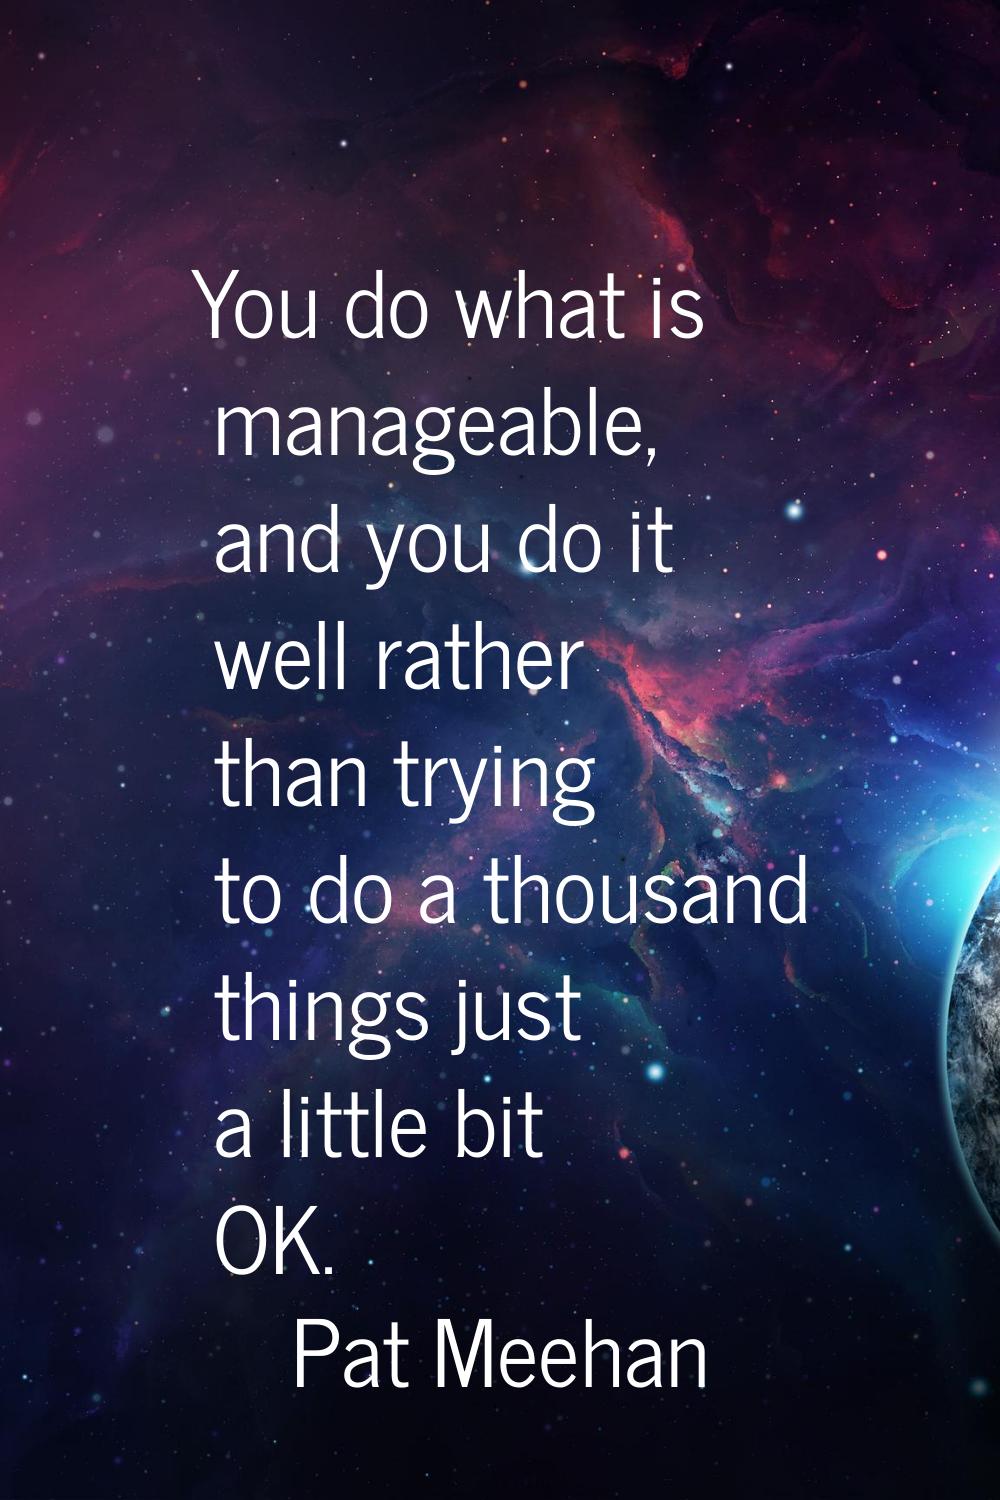 You do what is manageable, and you do it well rather than trying to do a thousand things just a lit